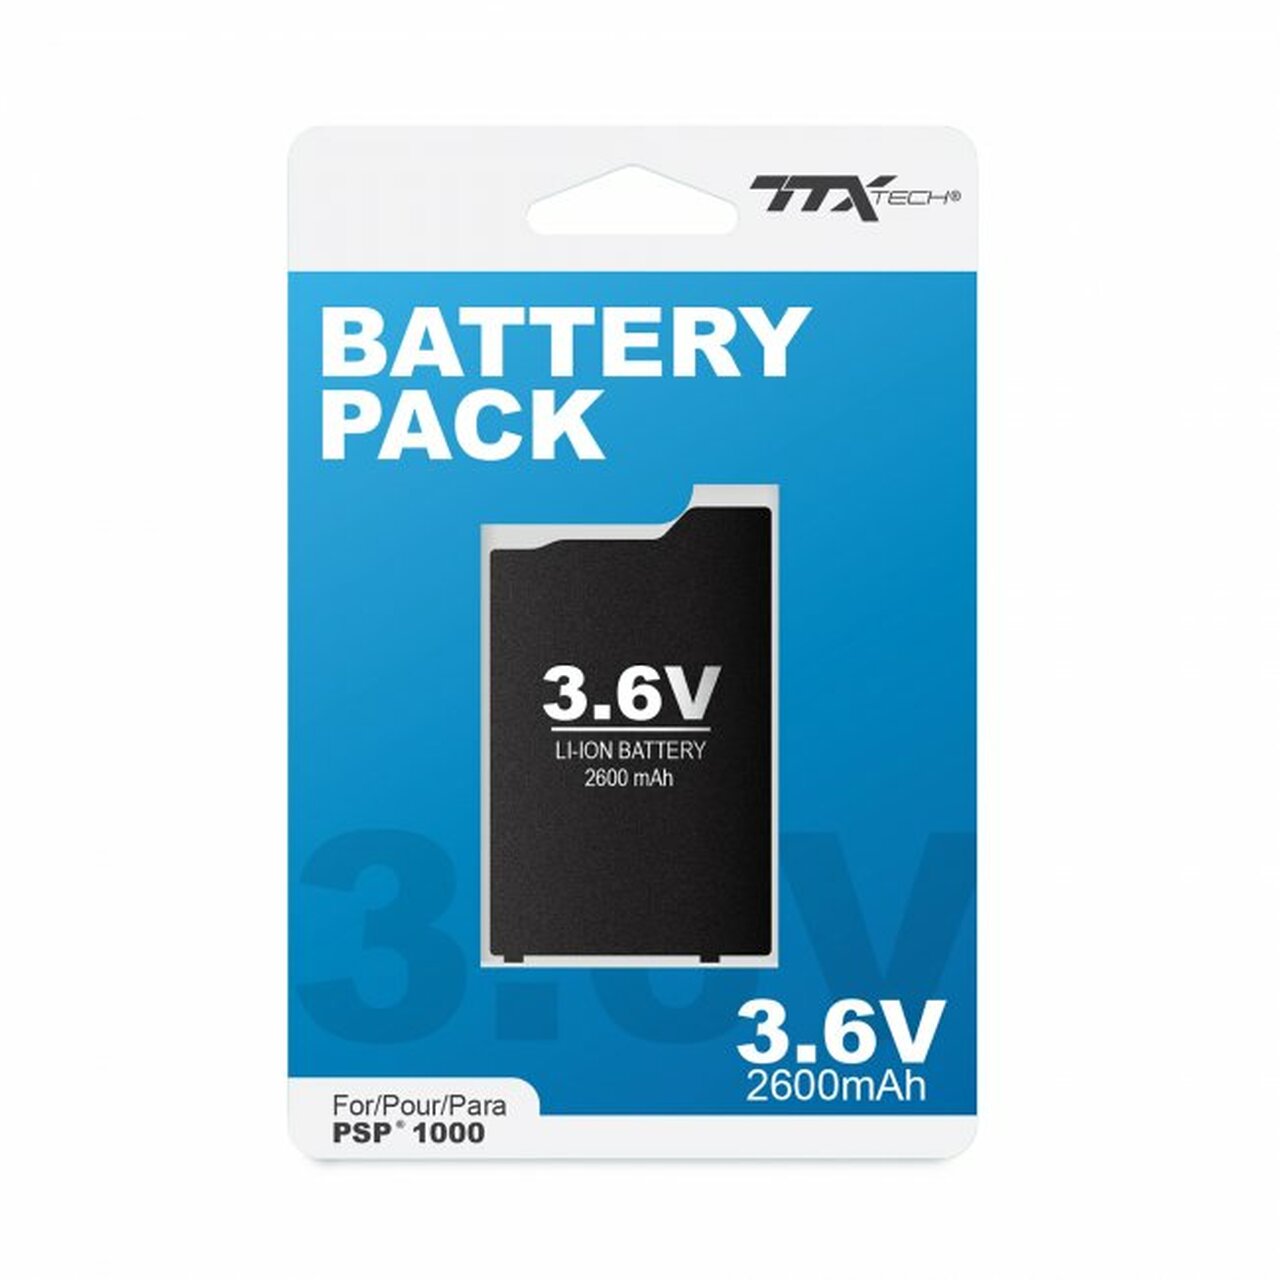 PSP 1000 TTX: Rechargeable Battery Pack